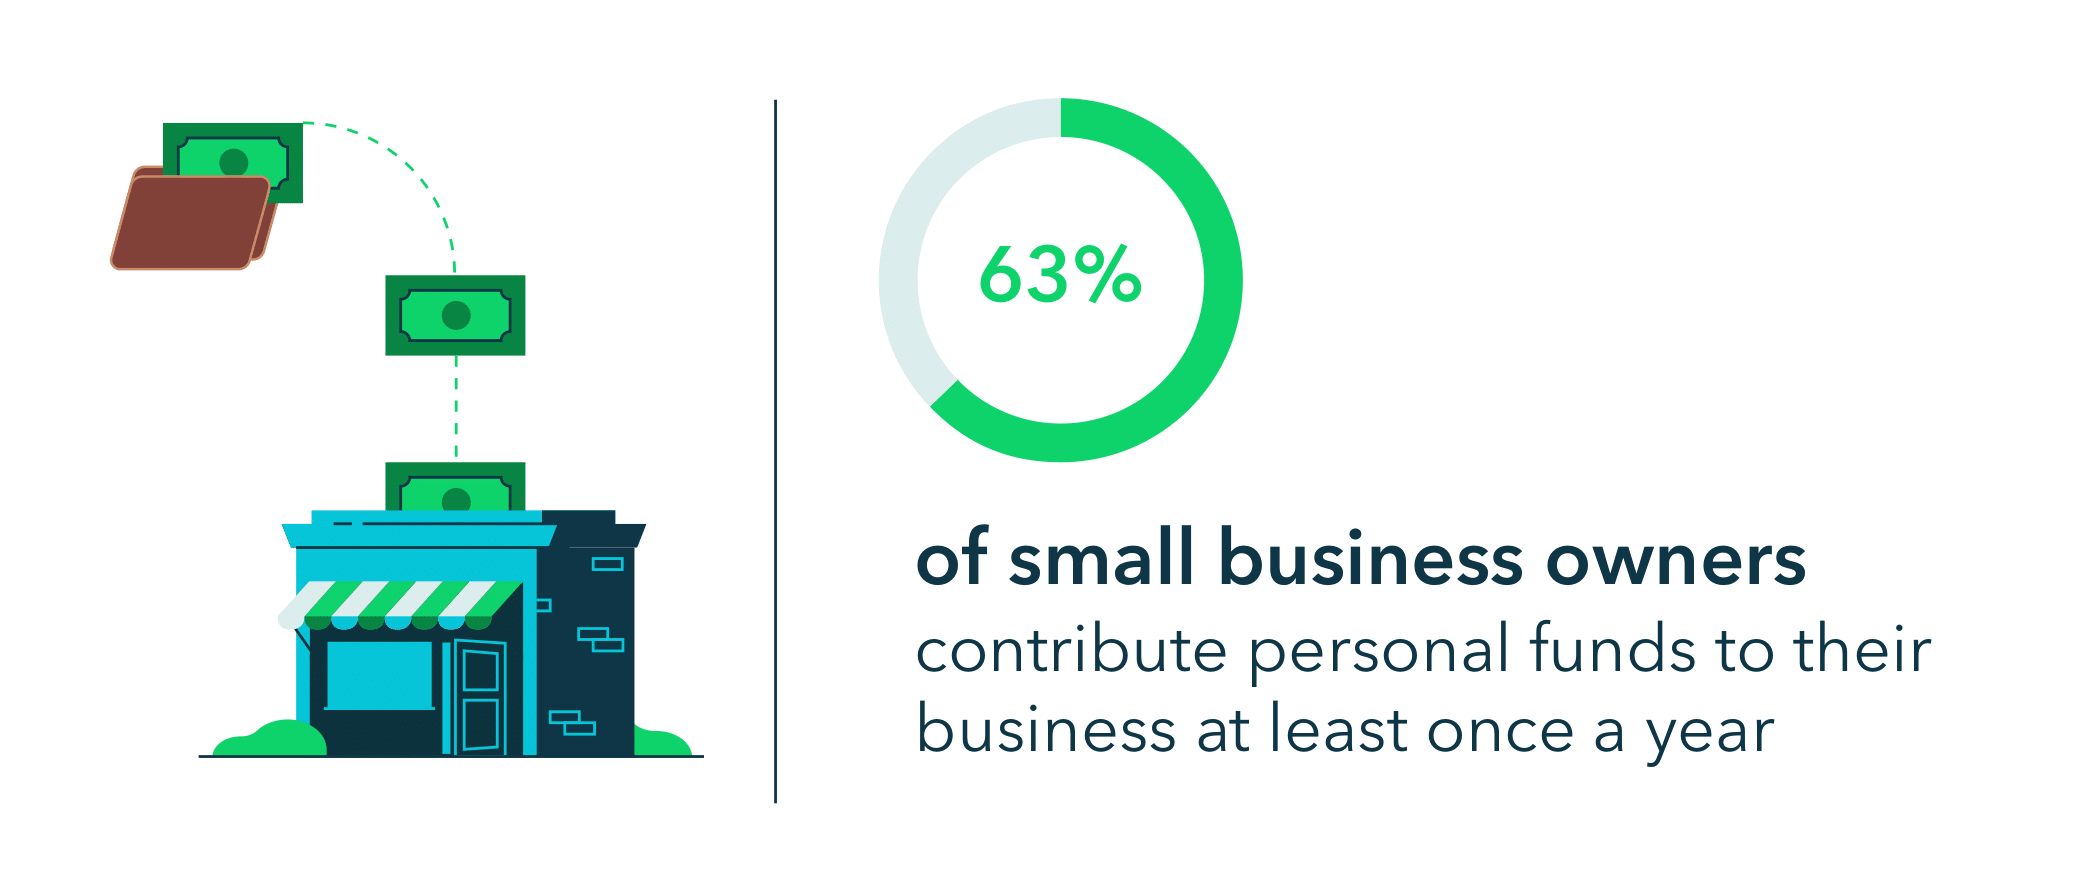 63% of small business owners contribute personal funds to their business at least once a year.